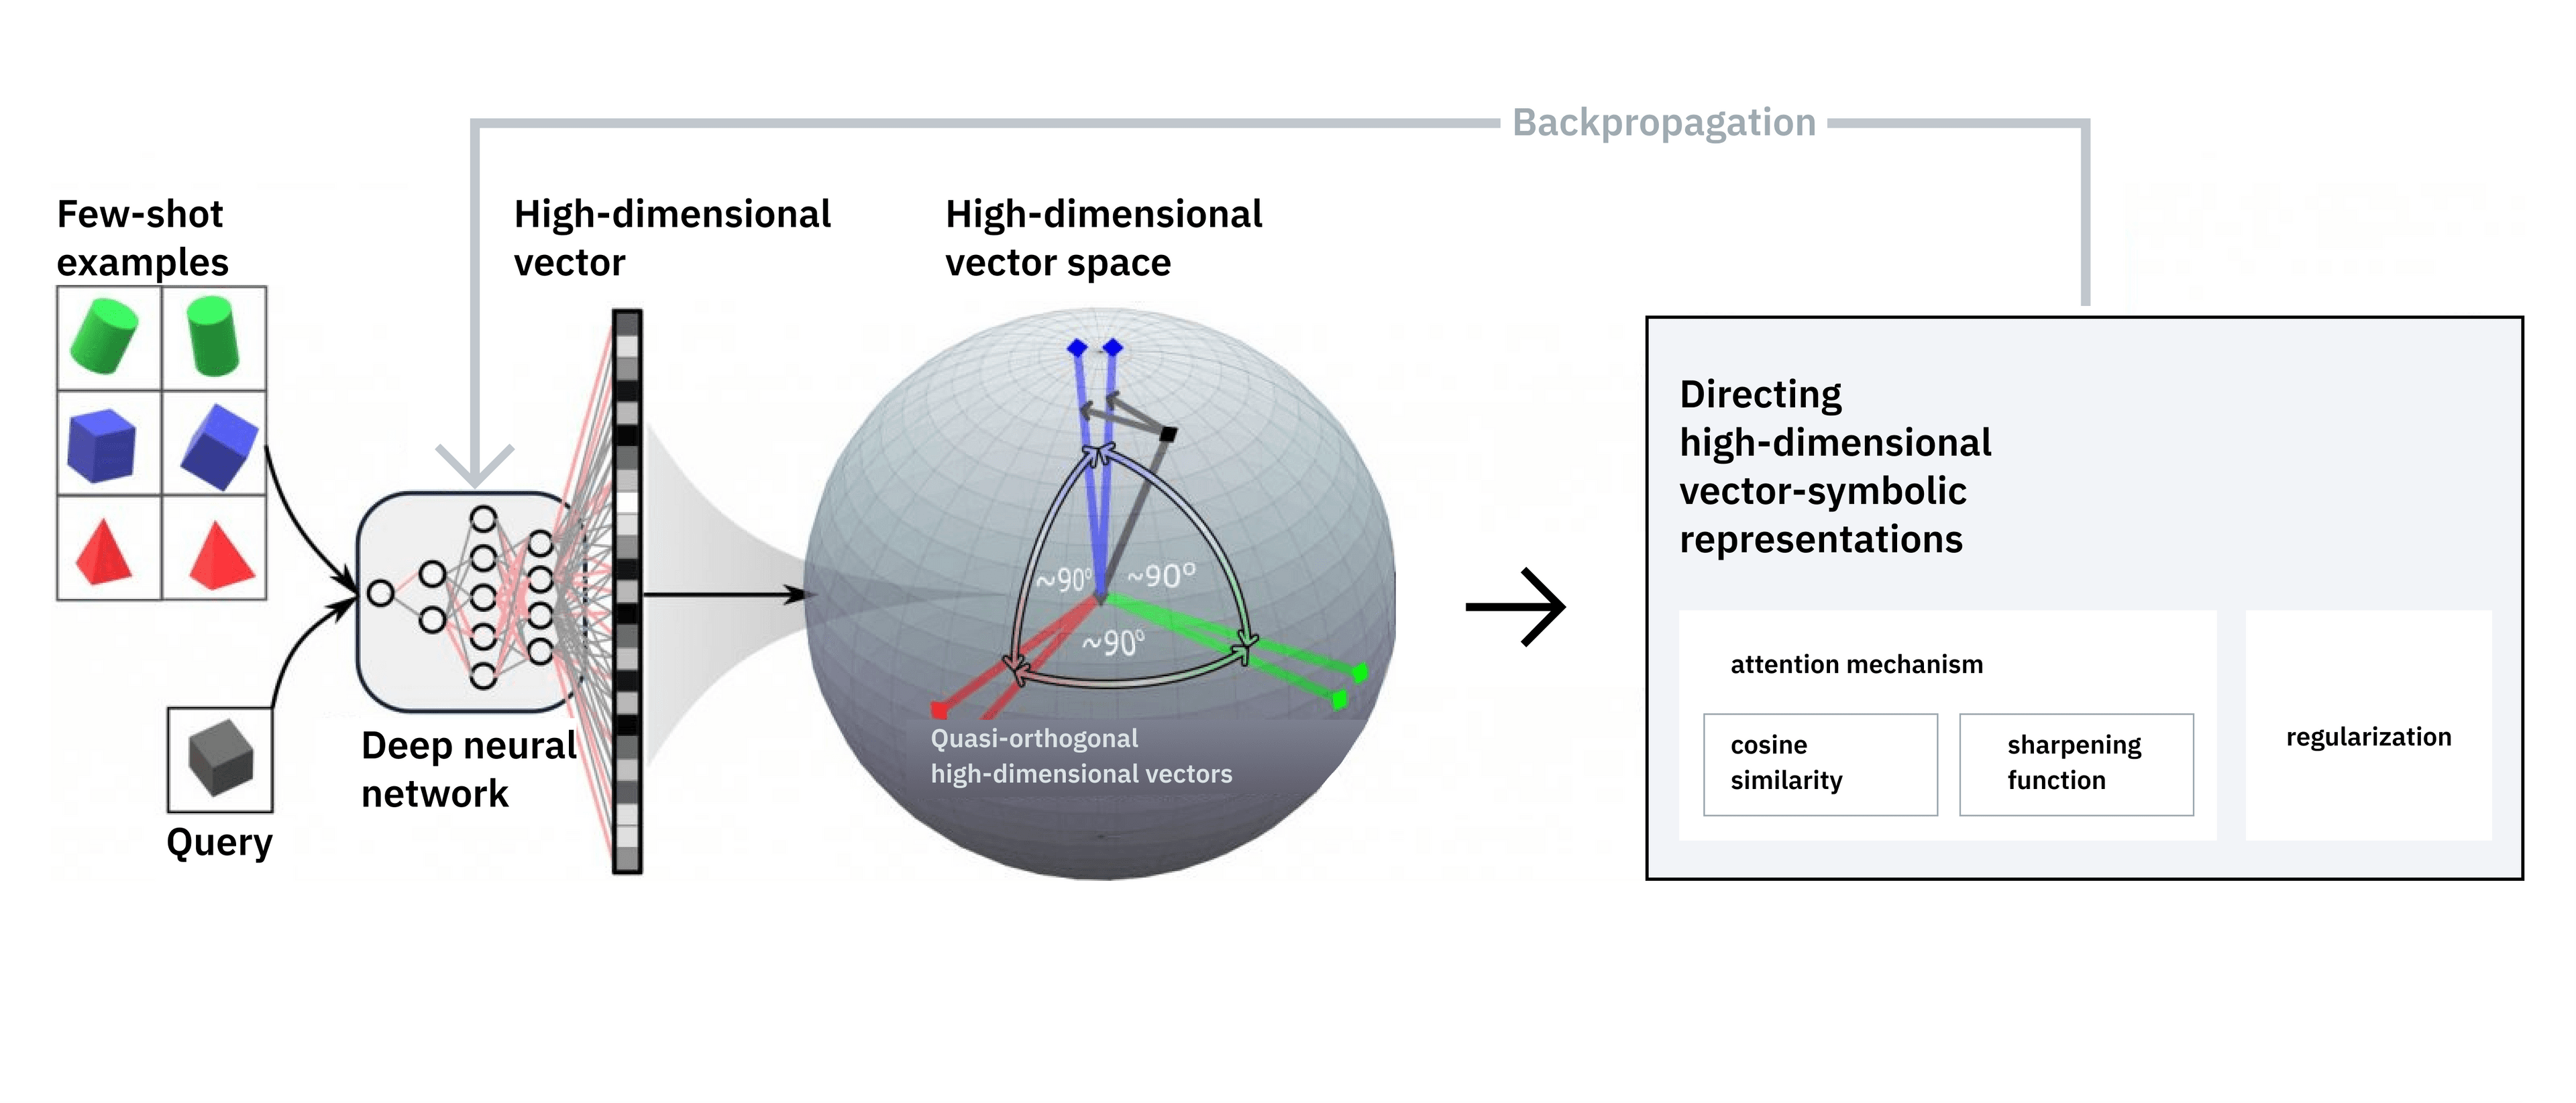 Diagram of a proposed methodology to merge deep network representations with vector-symbolic representations in high-dimensional computing